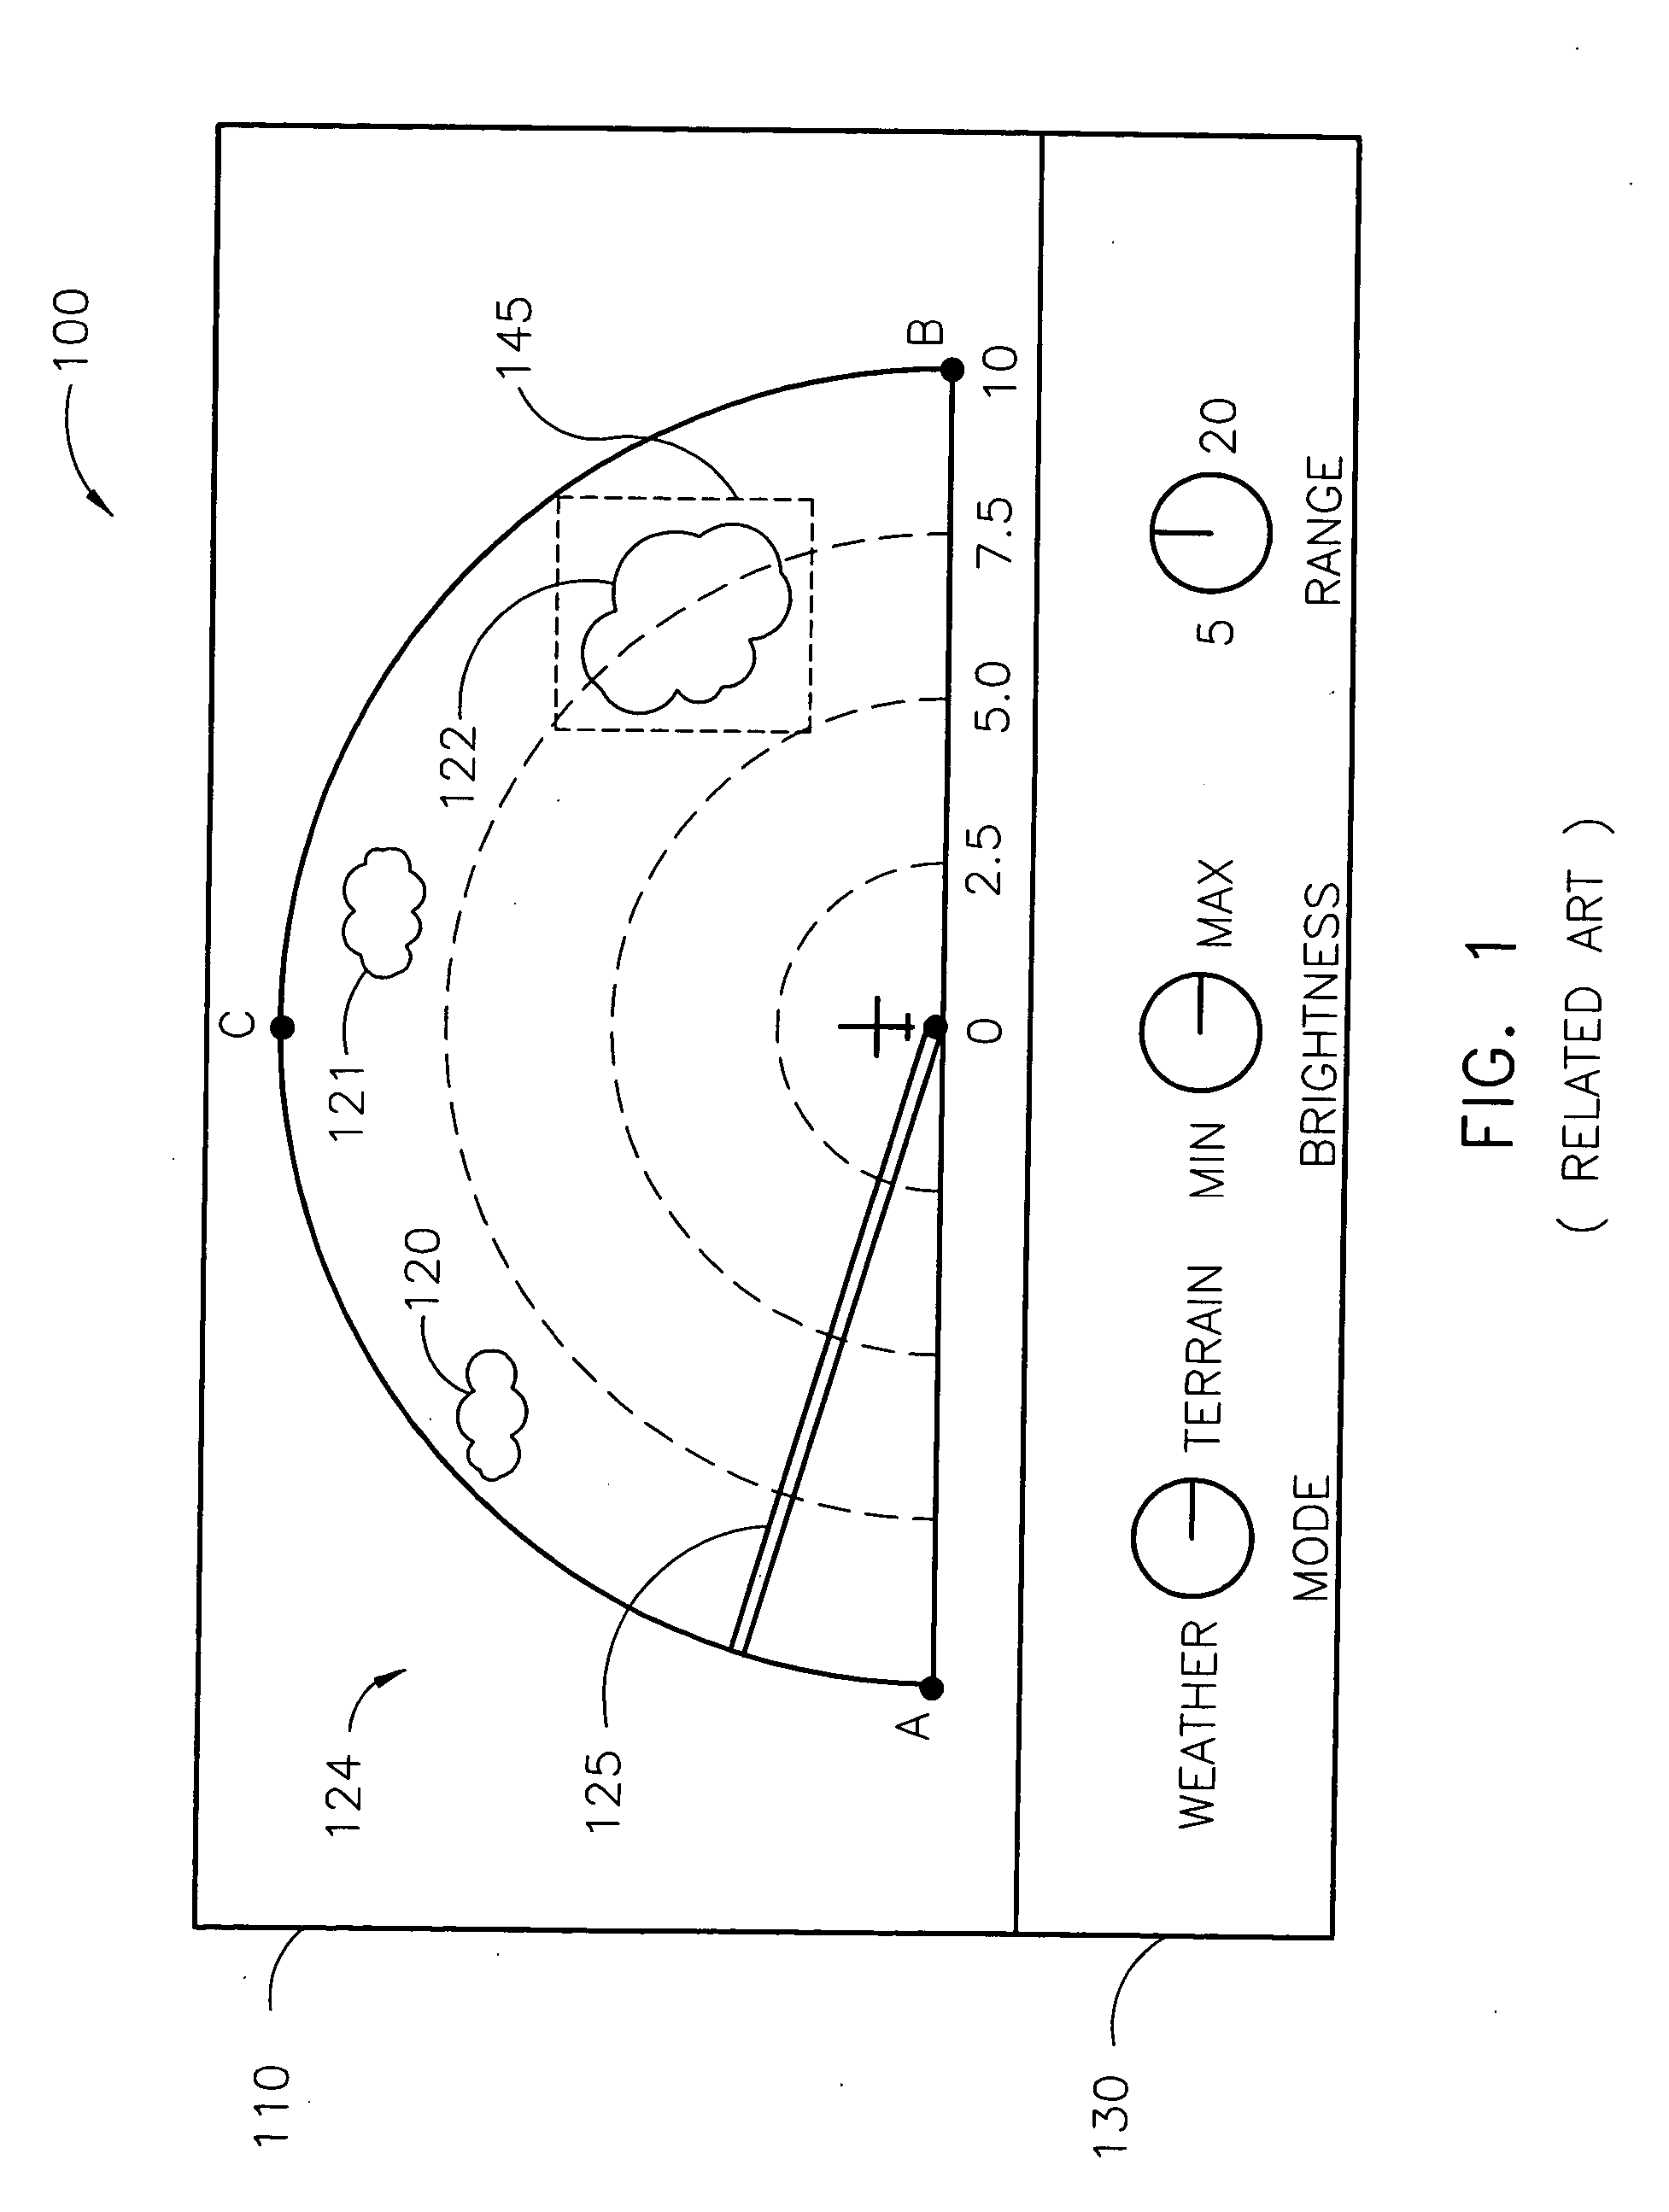 Systems and methods for displaying hazards